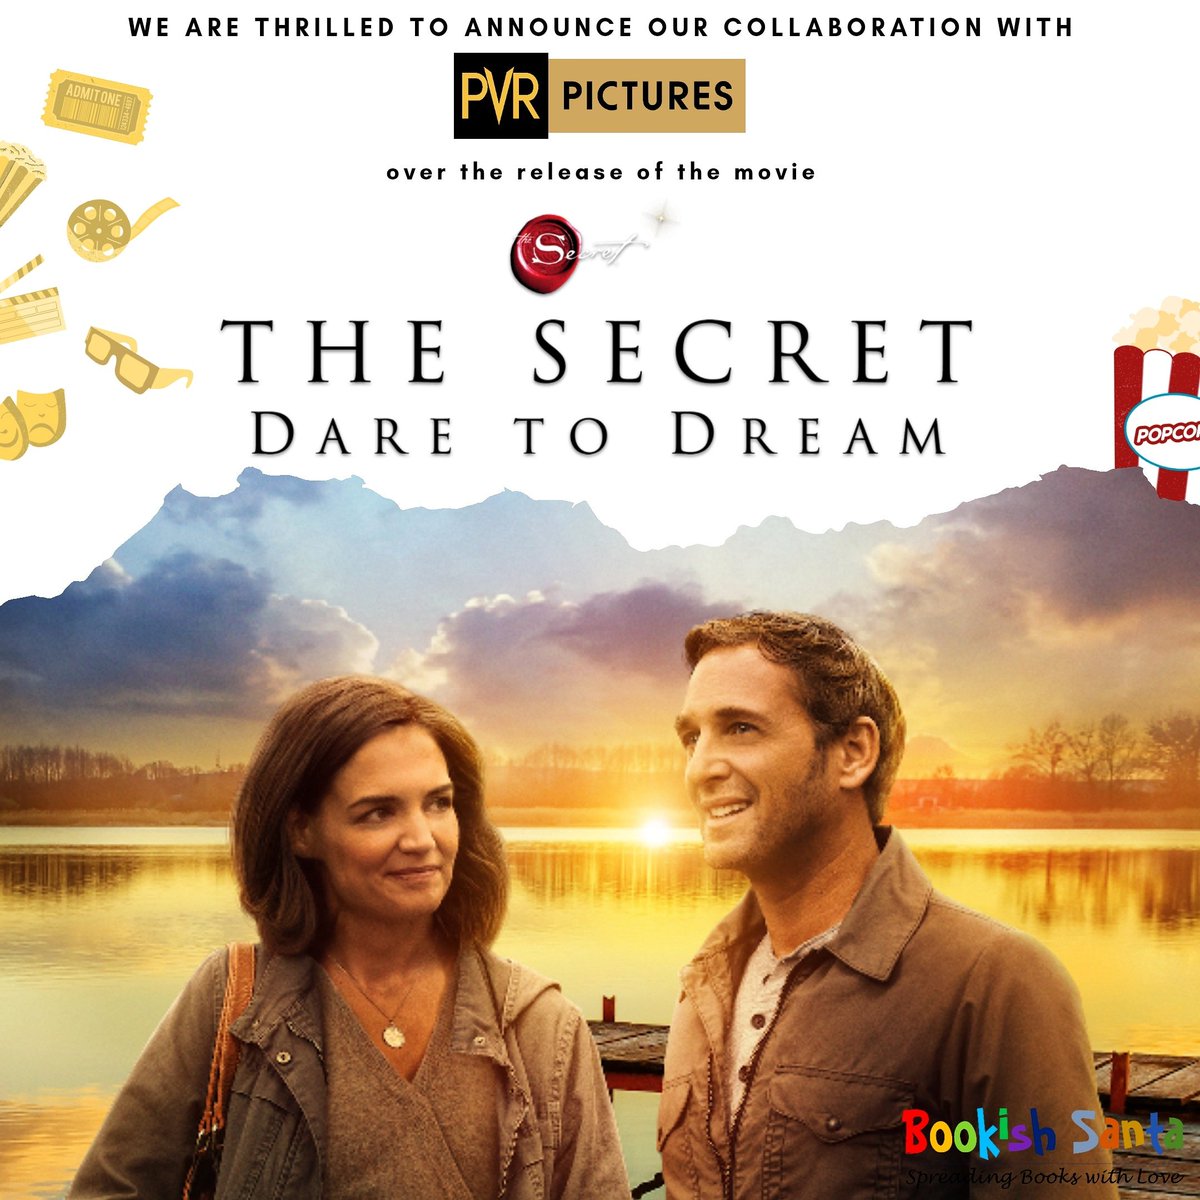 We are excited to announce that we are collaborating with PVR Pictures (@PicturesPVR) over the release of the movie - The Secret: #DareToDream set to release on 27th November, 2020.

Dare to Dream is based on the self-help book #TheSecret by Rhonda Byrne. 🎬
#TheSecretDareToDream